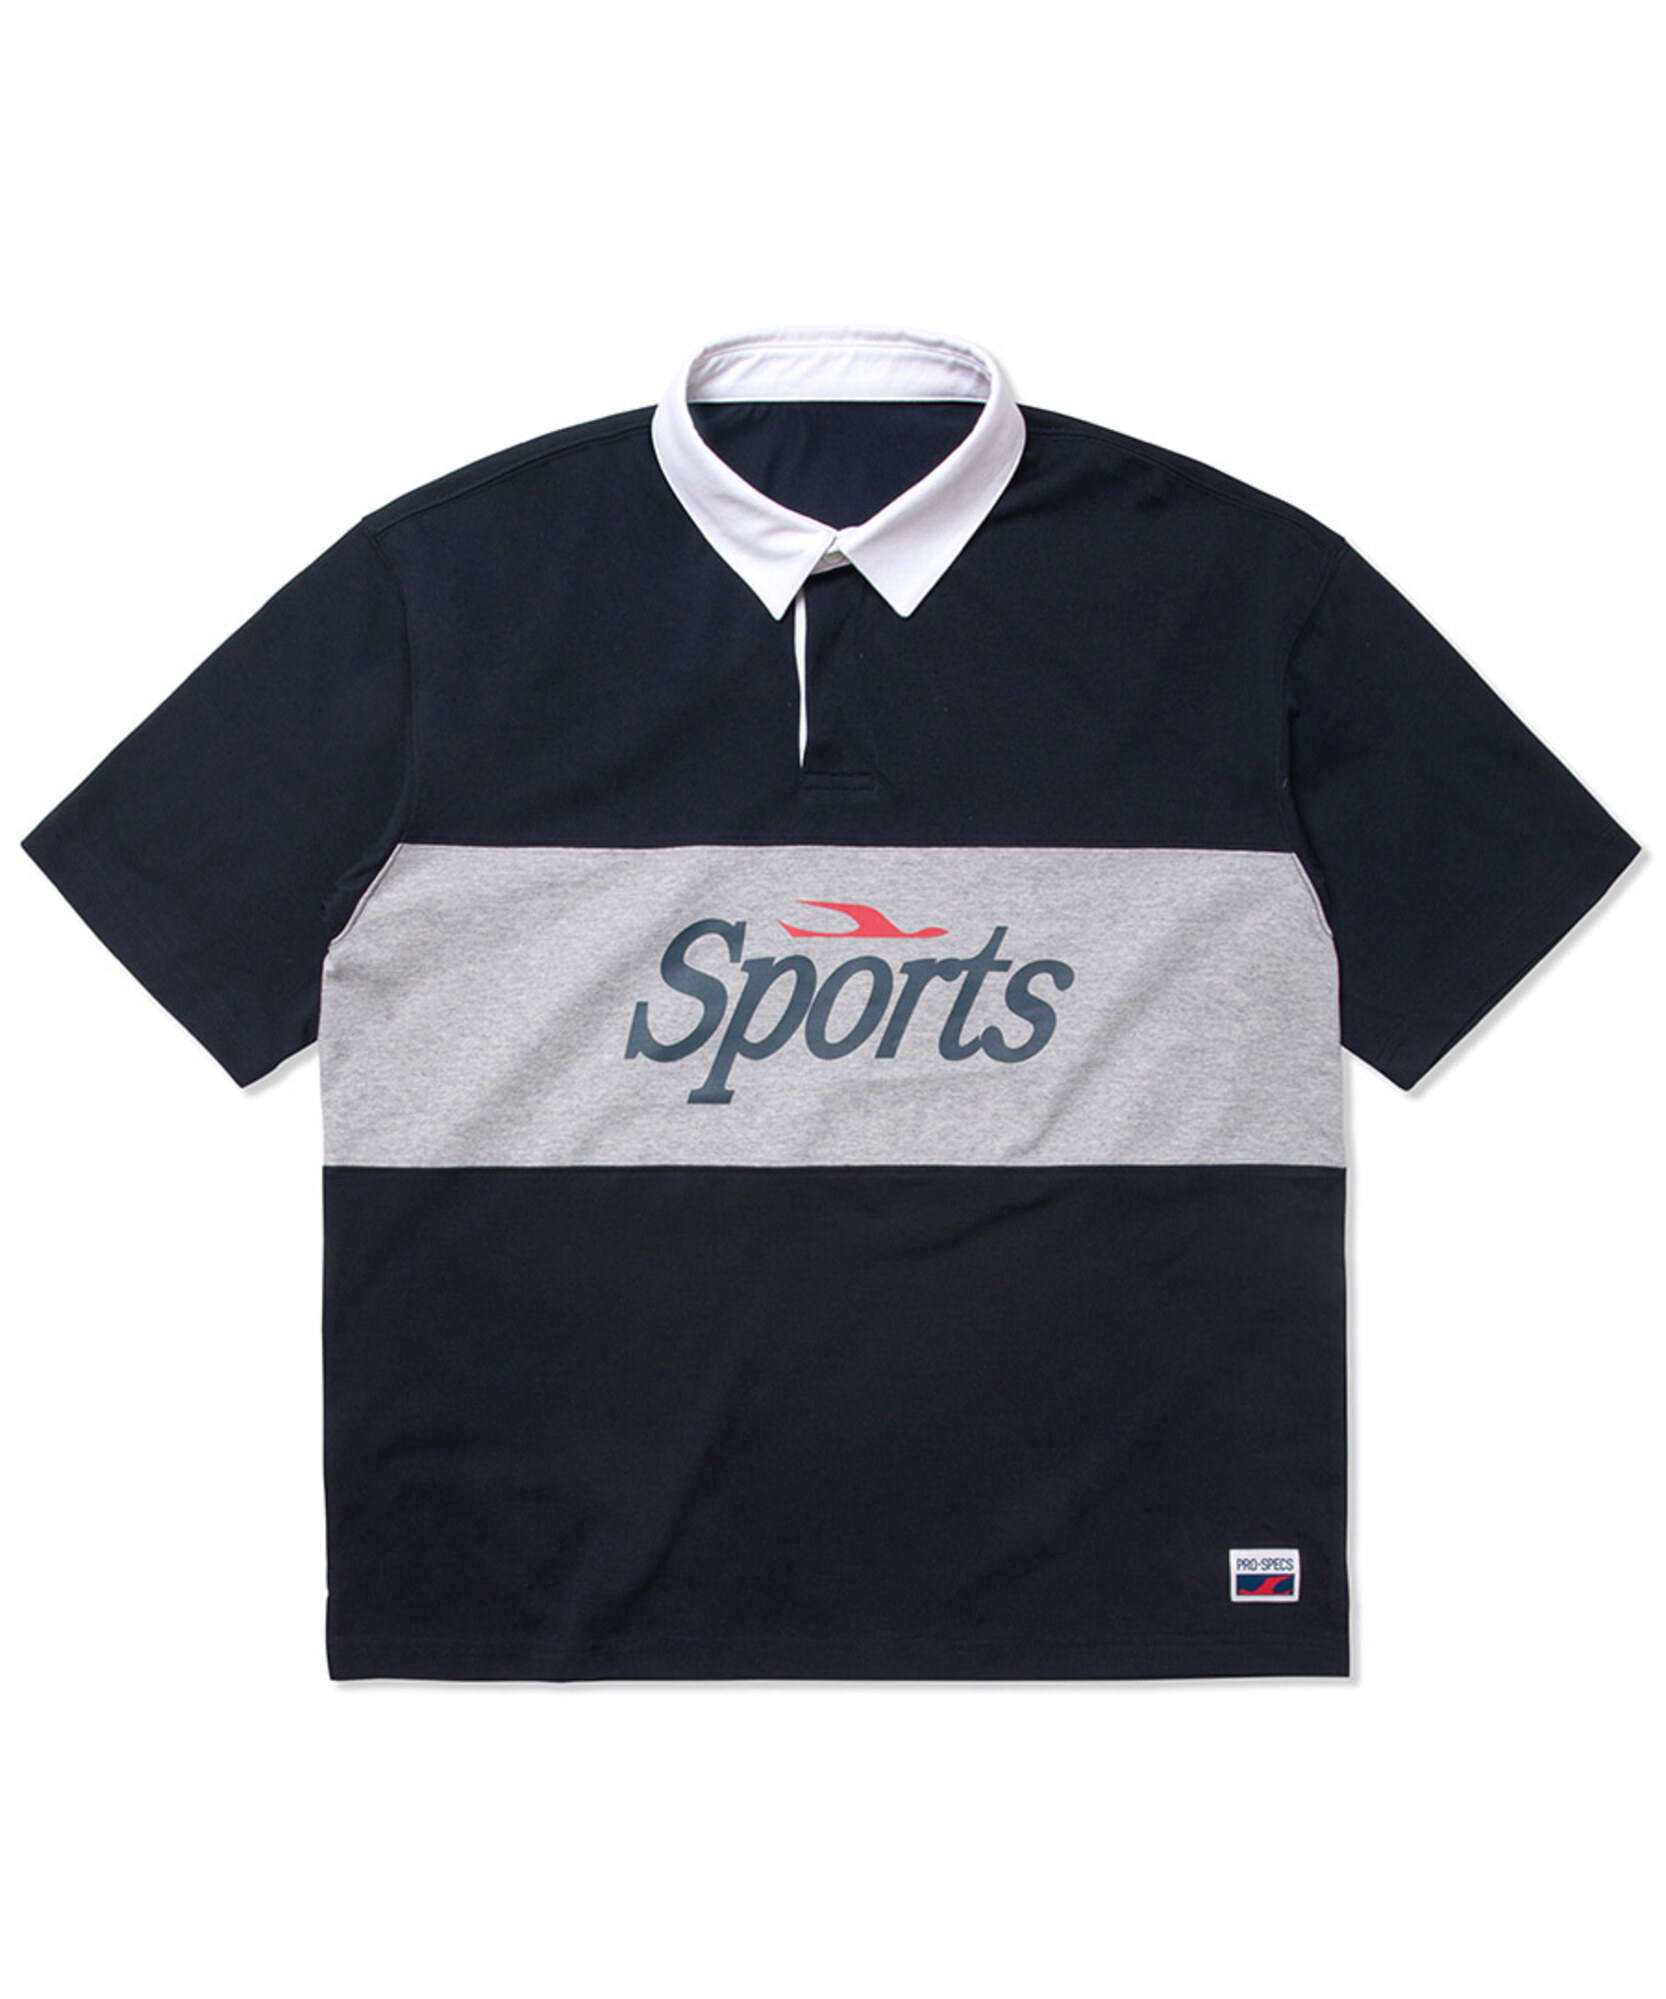 SPORTS RUGBY T-SHIRTS NAVY